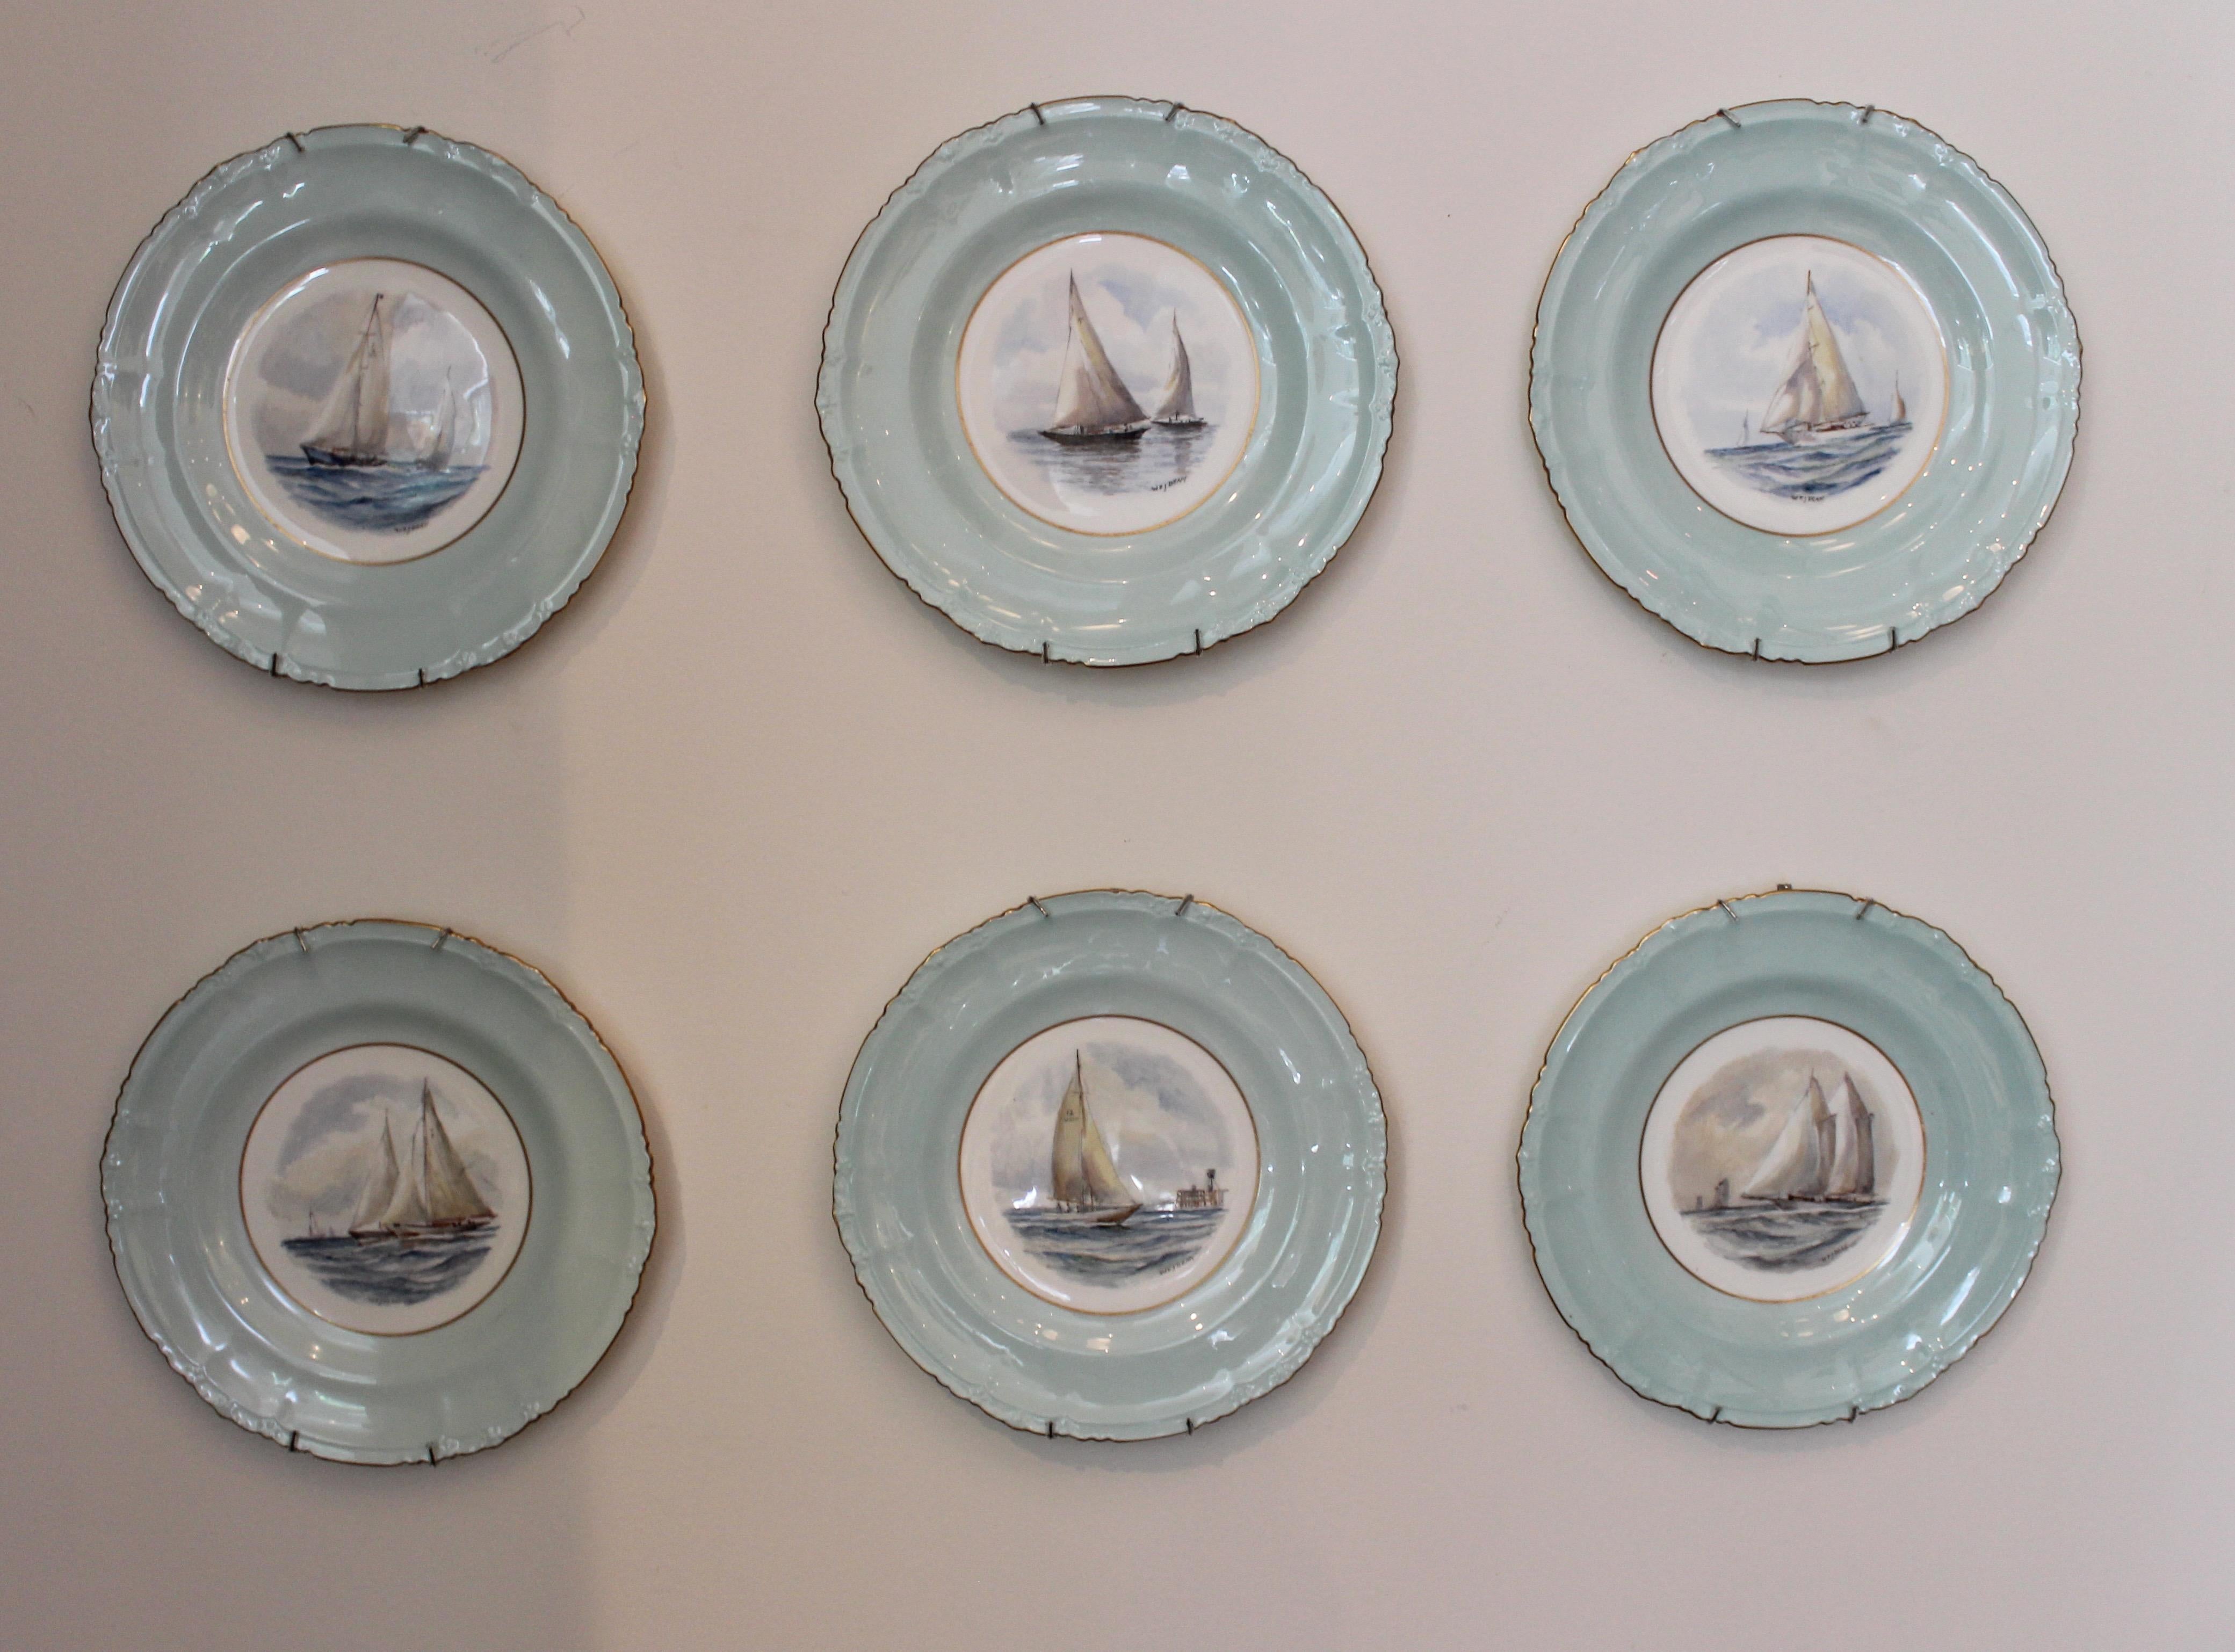 Set of 12 Royal Crown Derby Porcelain Plates with Yachting Scenes 1